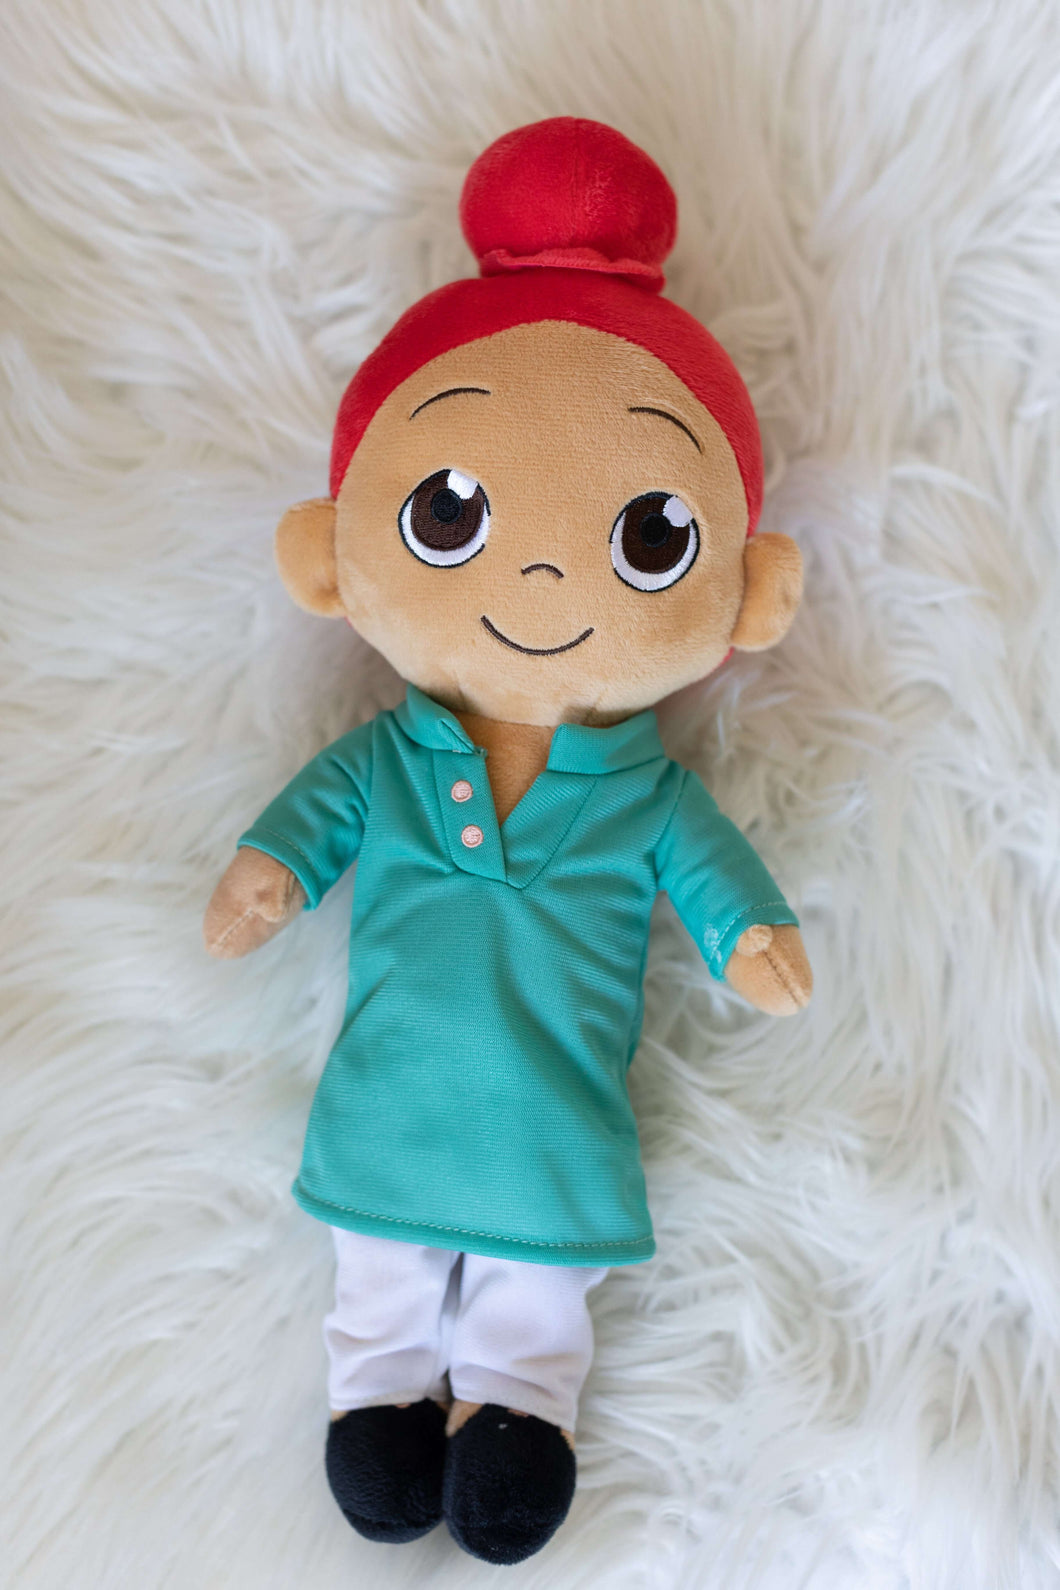 Manu is an Indian, Sikh, Punjabi boy. This plush toy is for children of all ages. 